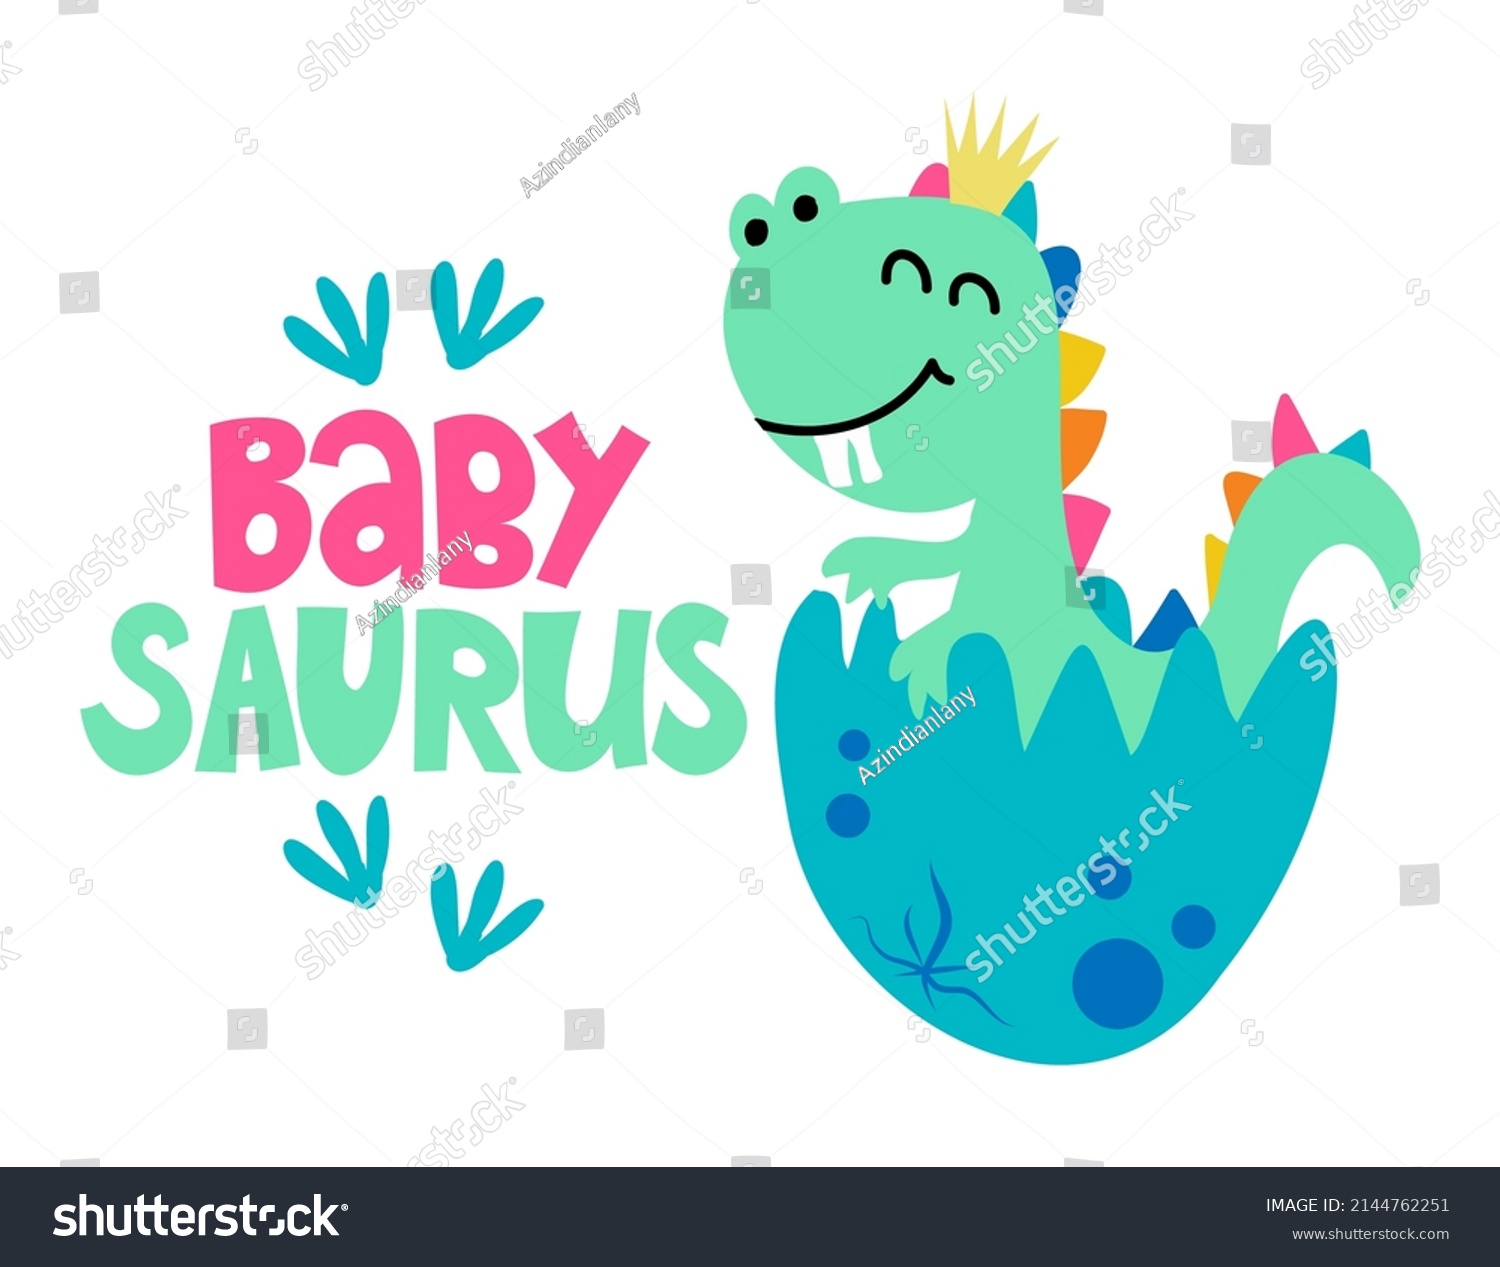 SVG of Baby Saurus - funny hand drawn doodle, cartoon dino. Good for Poster or t-shirt textile graphic design. Vector hand drawn illustration. Dinosaur Queen. svg